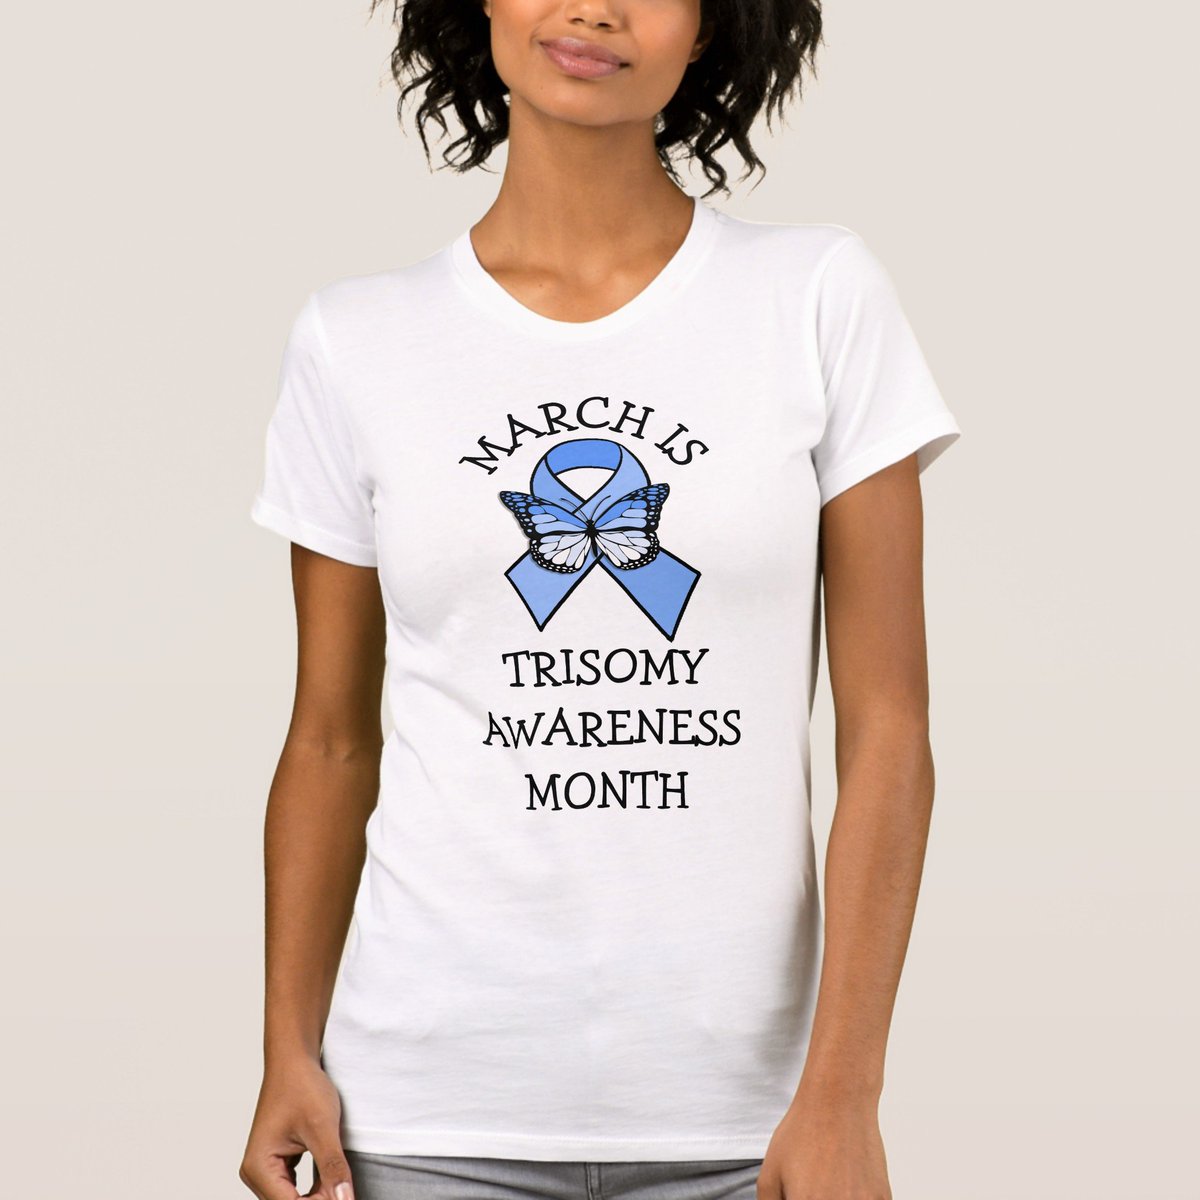 March is Trisomy Awareness Month 
#TrisomyAwarenessMonth Shirt 
Order Here
zazzle.com/march_is_triso…